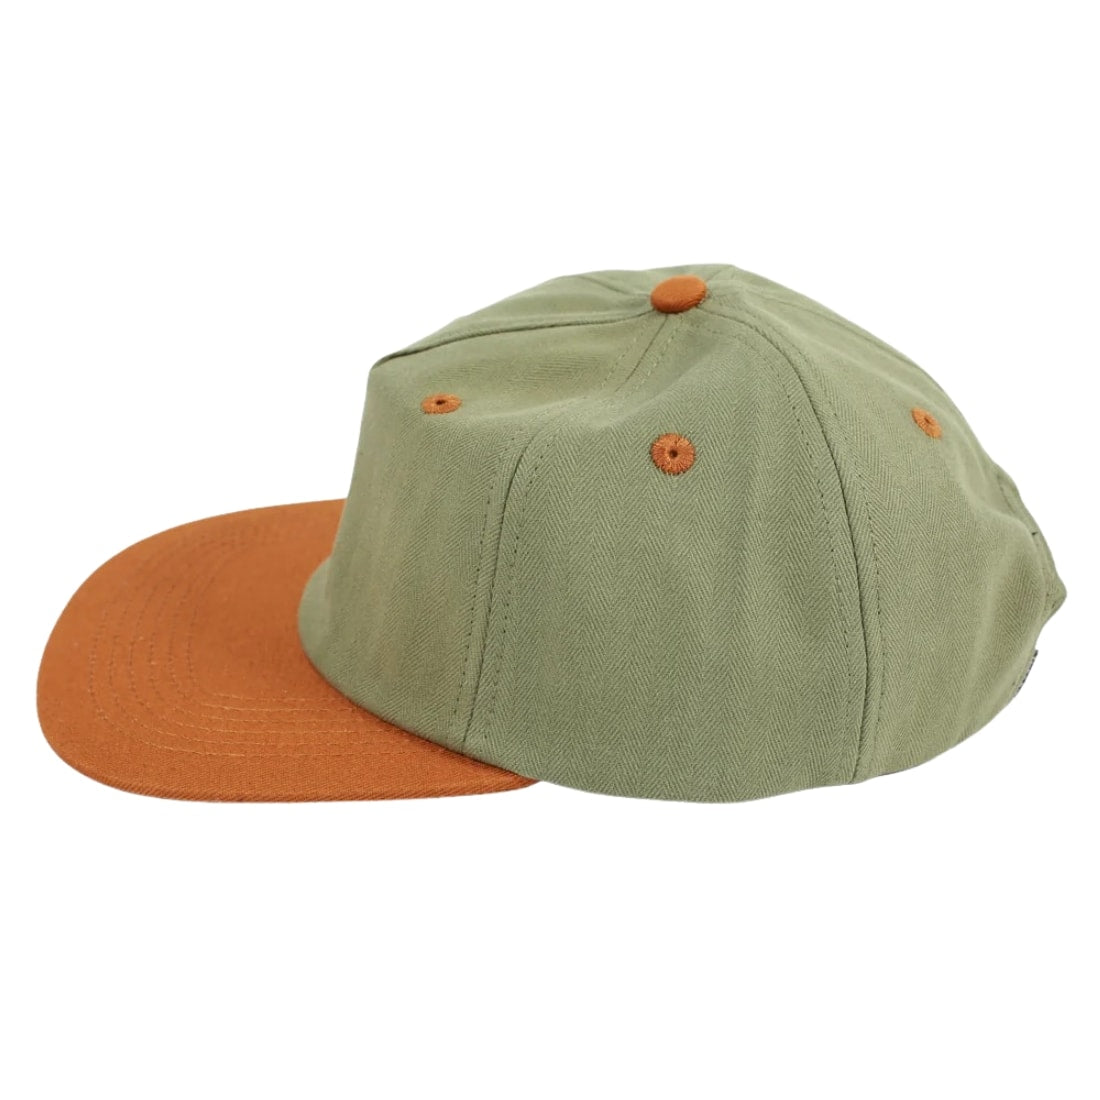 Theories Scribble Strapback Cap - Pine/Khaki - Strapback Cap by Theories One Size